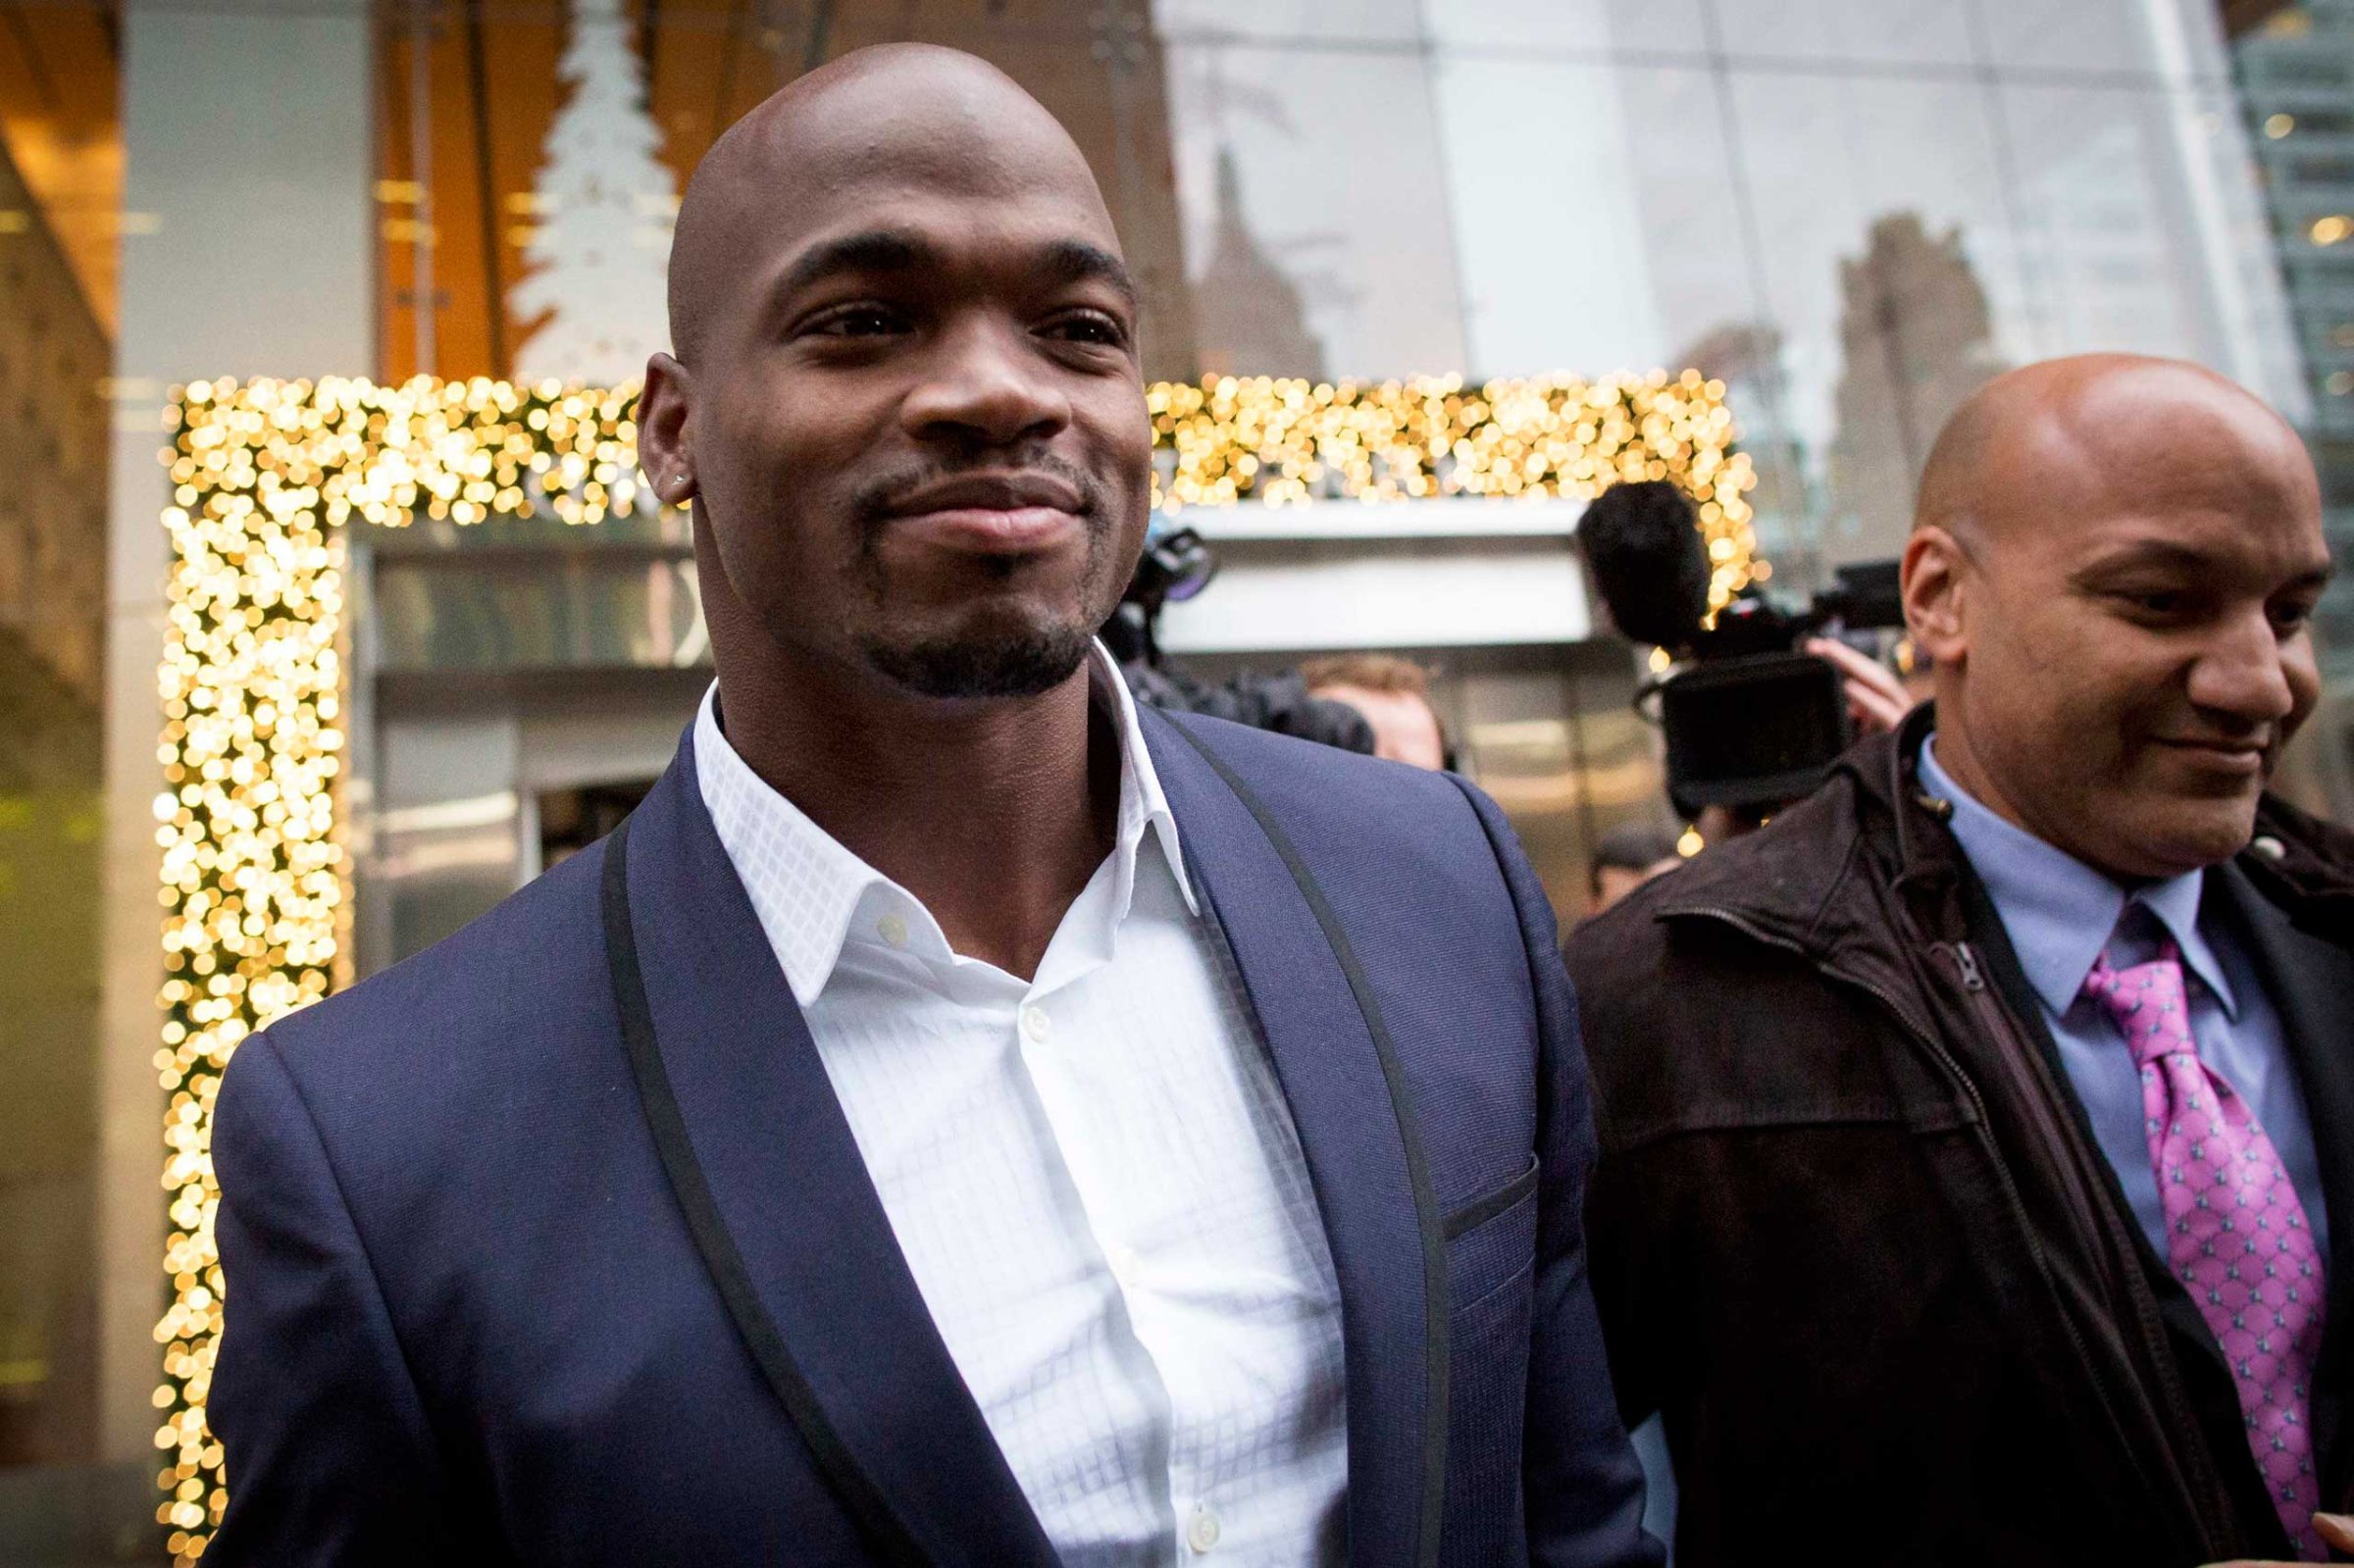 Suspended Minnesota Vikings running back Peterson exits following his hearing against the NFL over his punishment for child abuse, in New York